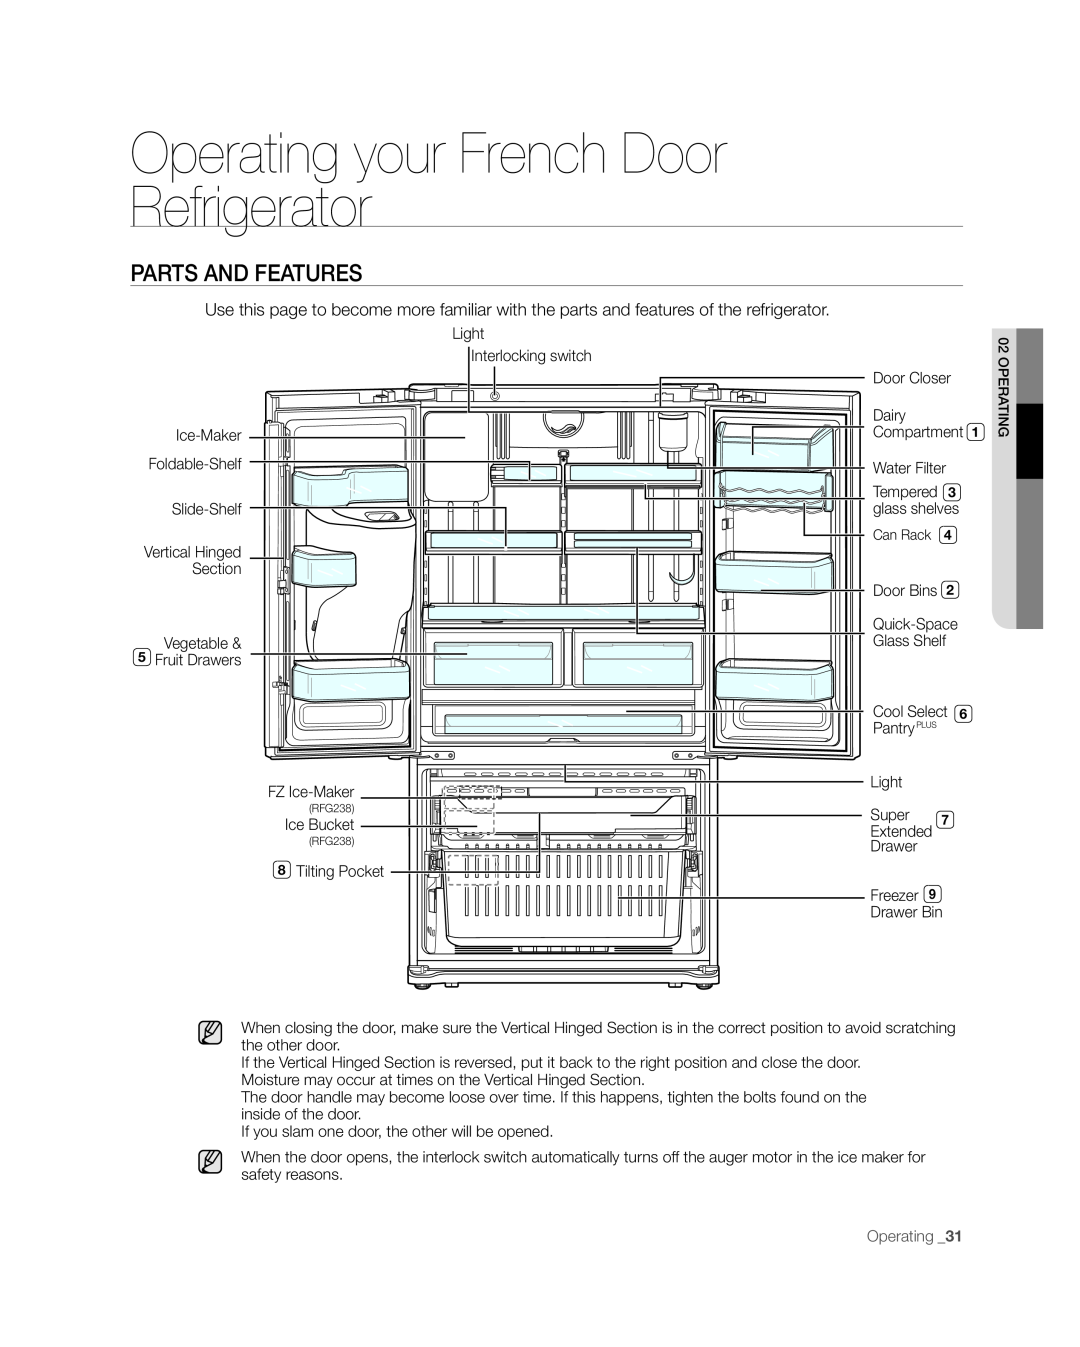 Samsung RFG238AARS, RFG237 user manual Parts And Features, Operating your French Door Refrigerator 